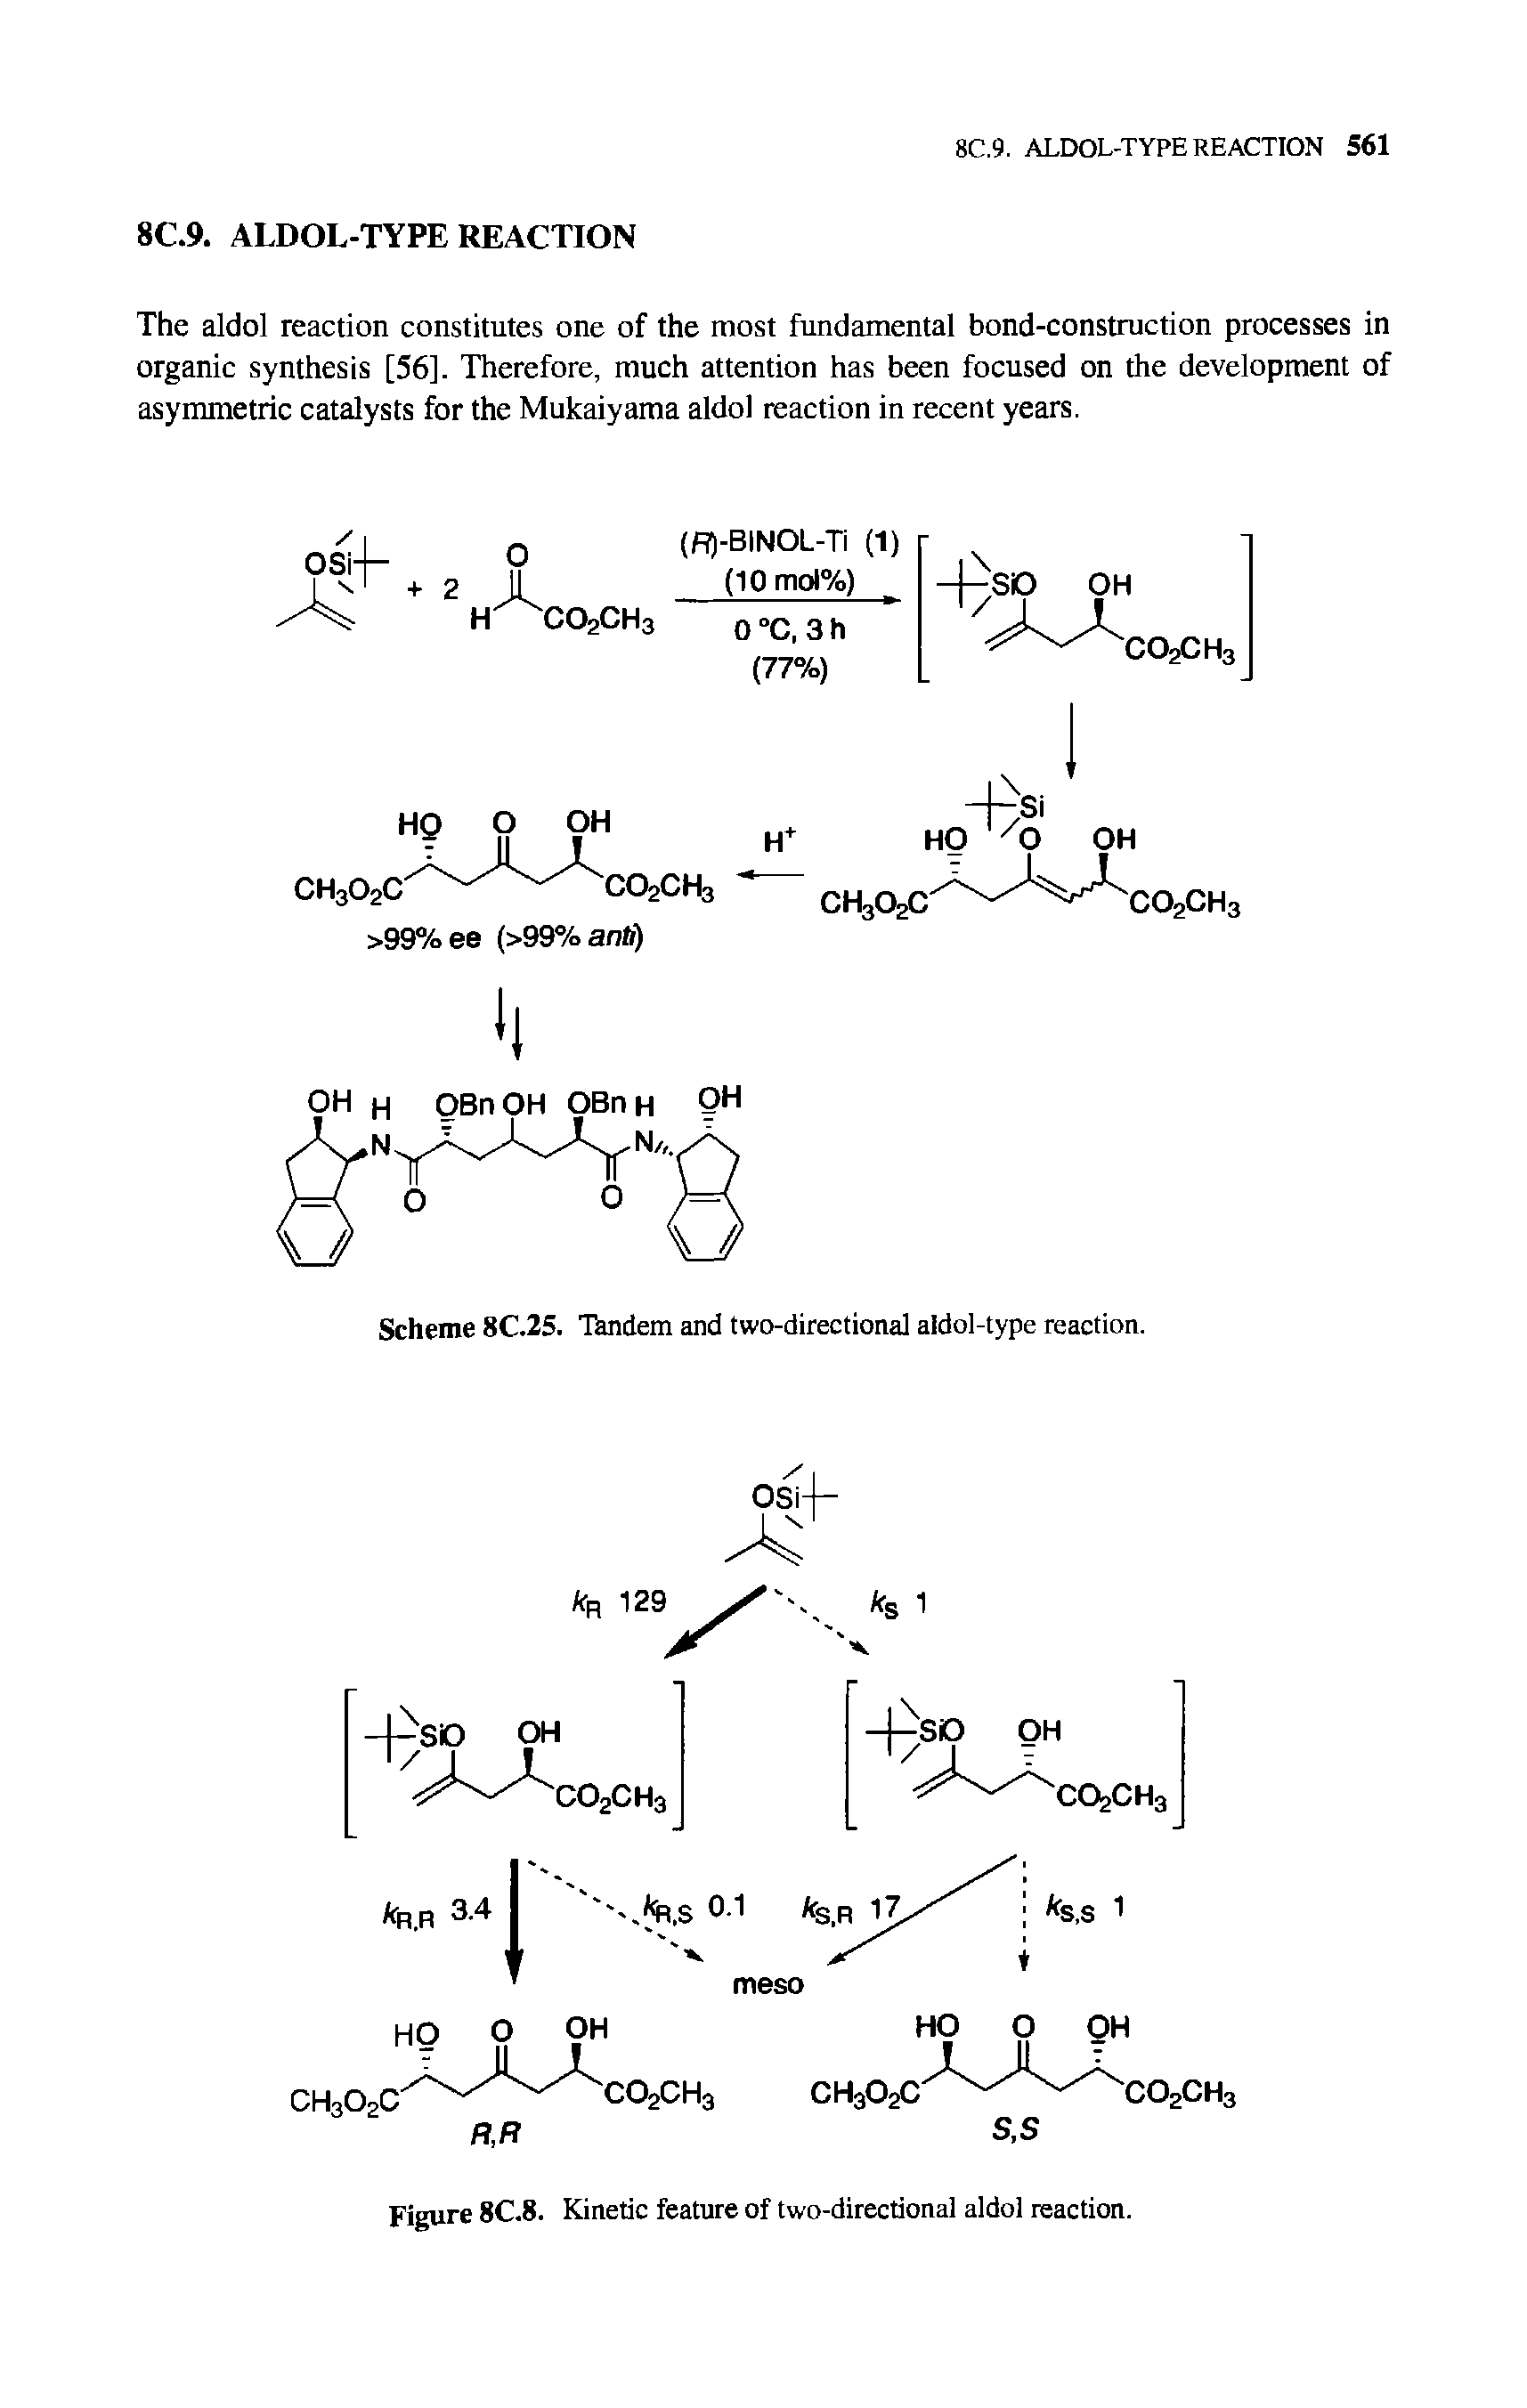 Scheme 8C.25. Tandem and two-directional aldol-type reaction.